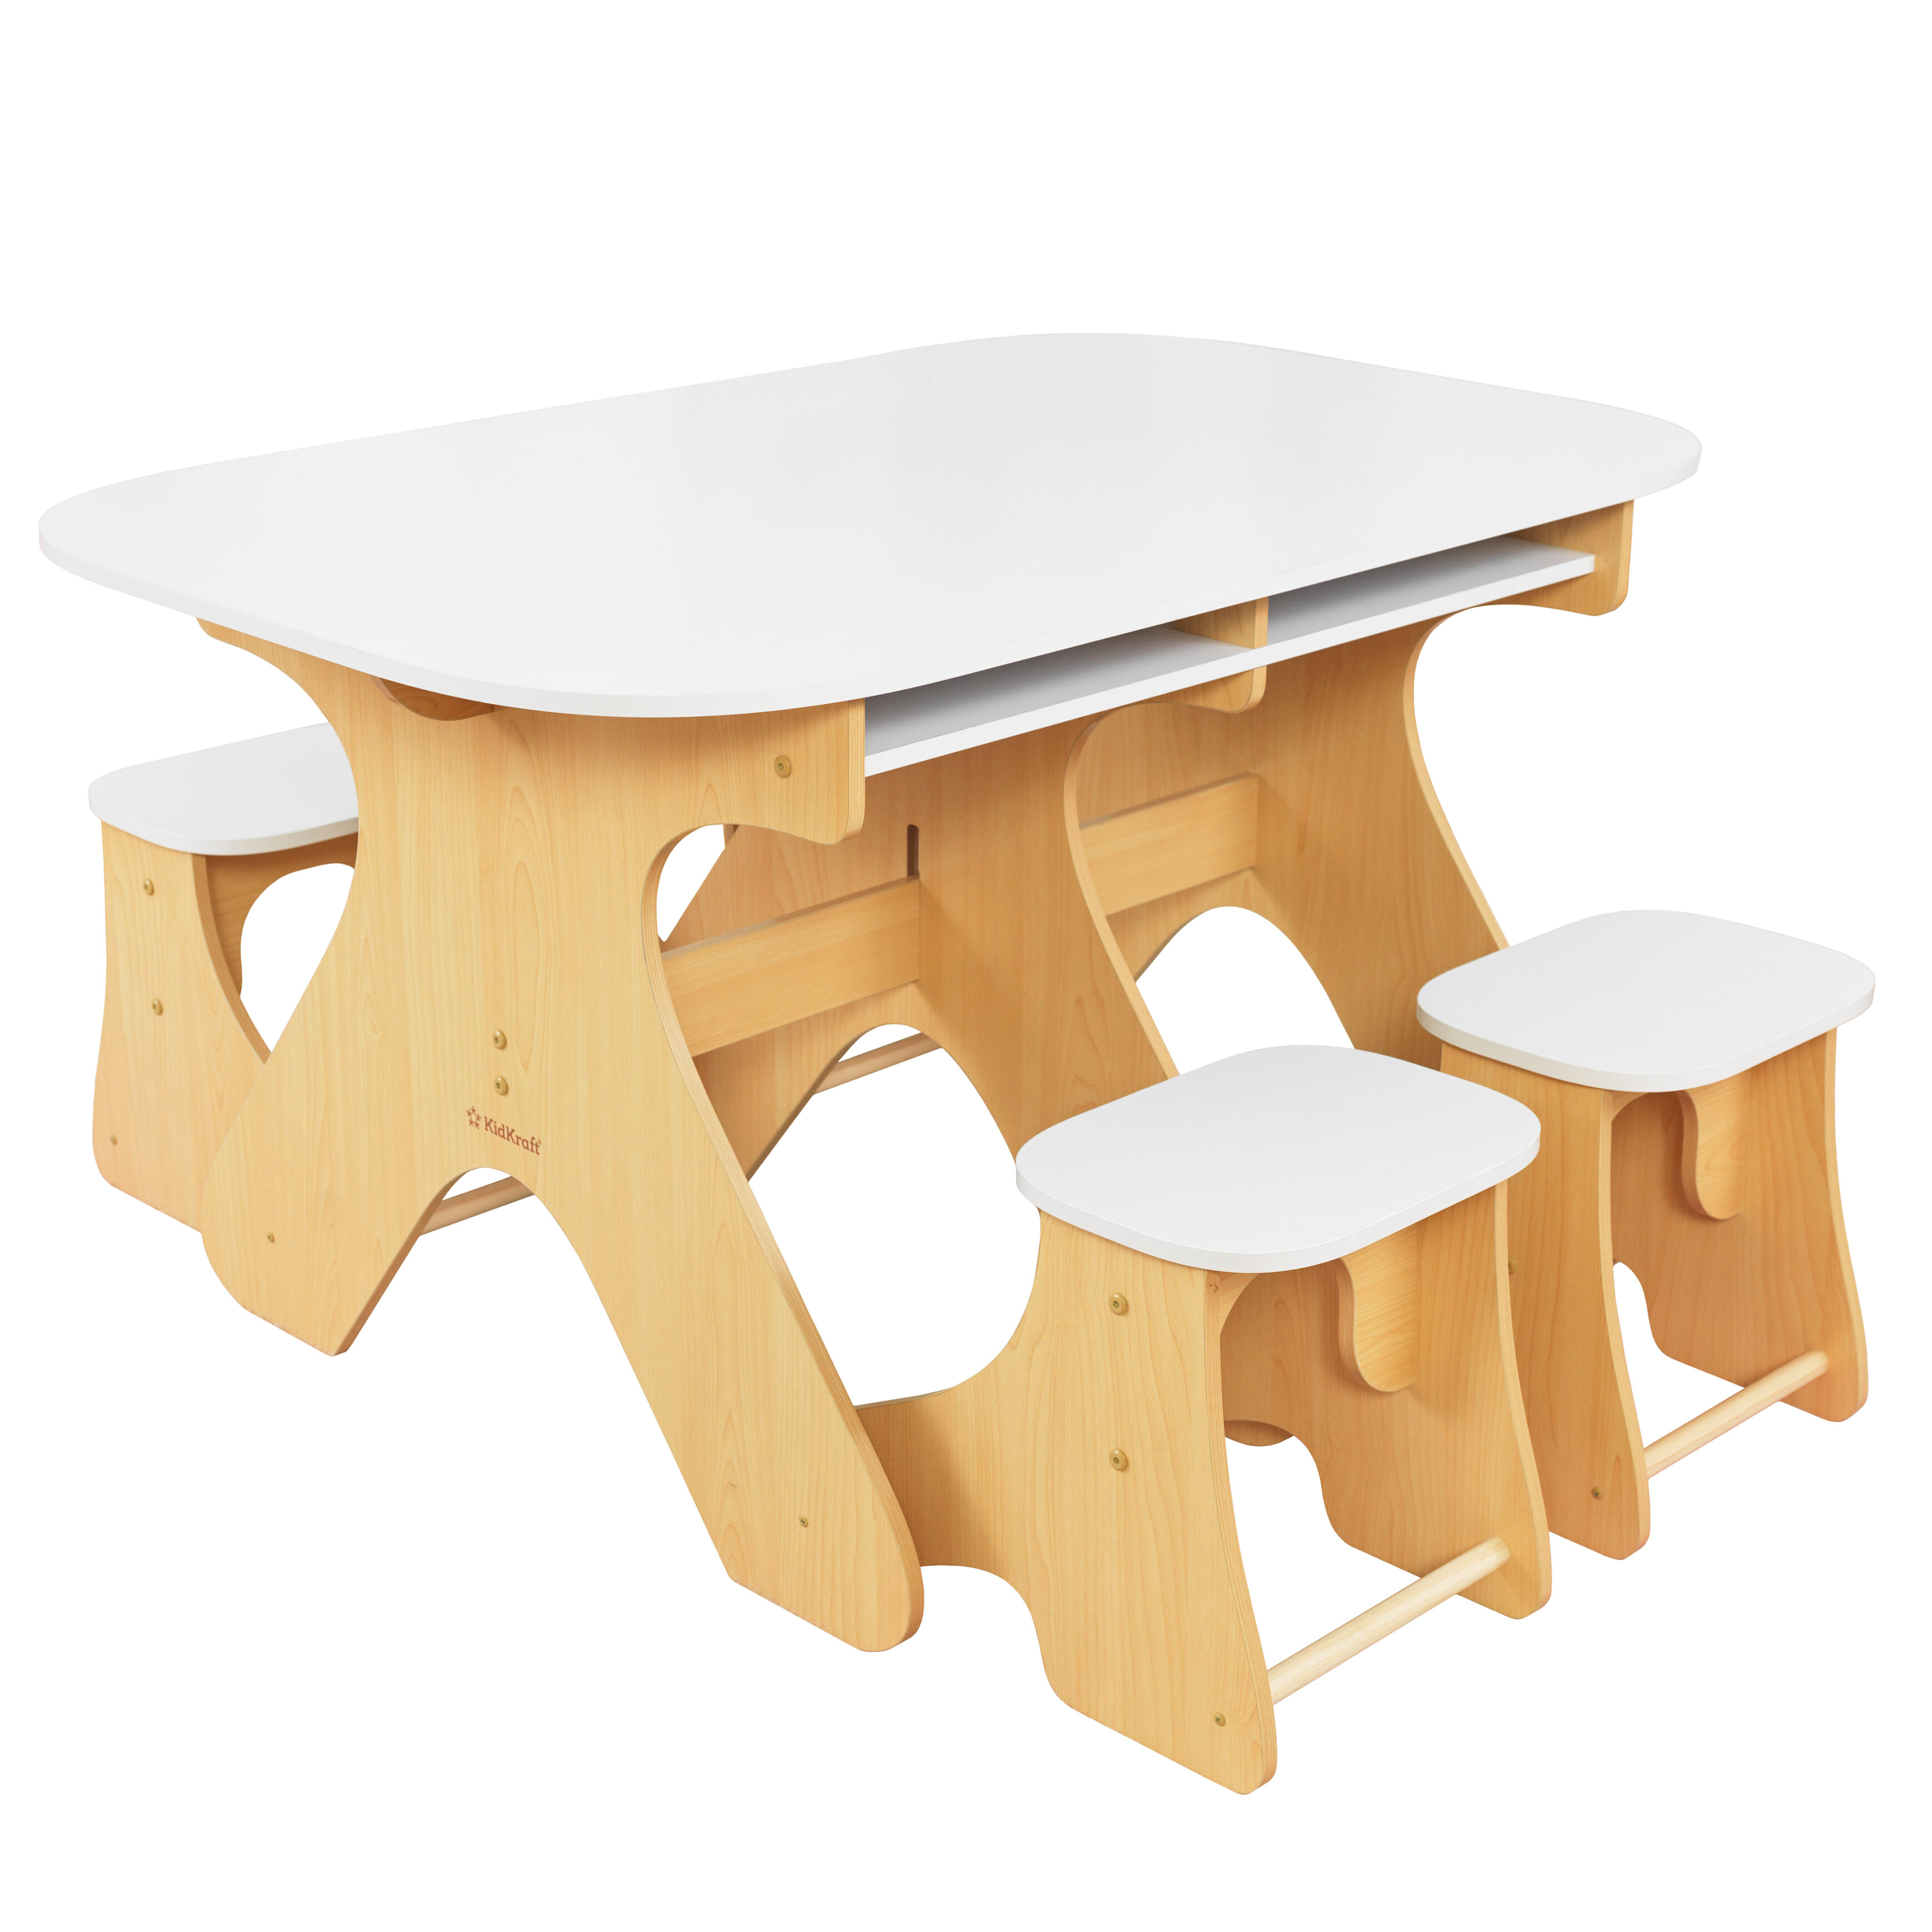 Homeschool and Light Tables: Childcraft Light Table Review